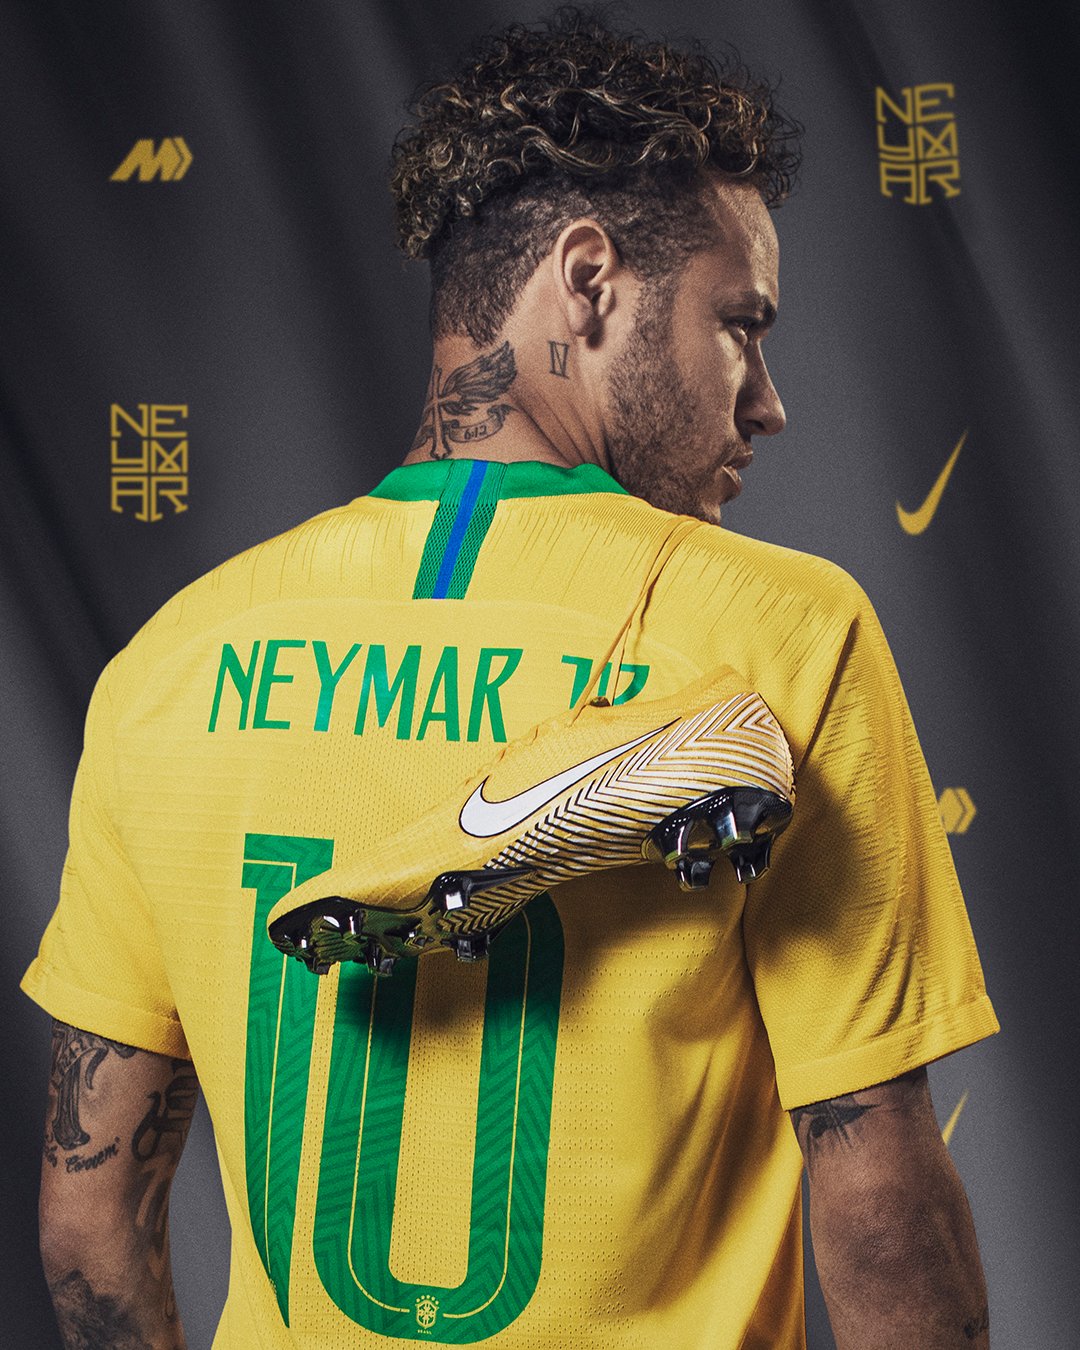 Nike Football on Twitter: "All that is your game. @neymarjr the new NJR “Meu Jogo” Mercurial Vapor 360, inspired by Neymar Jr's unrivalled belief unique style of play.